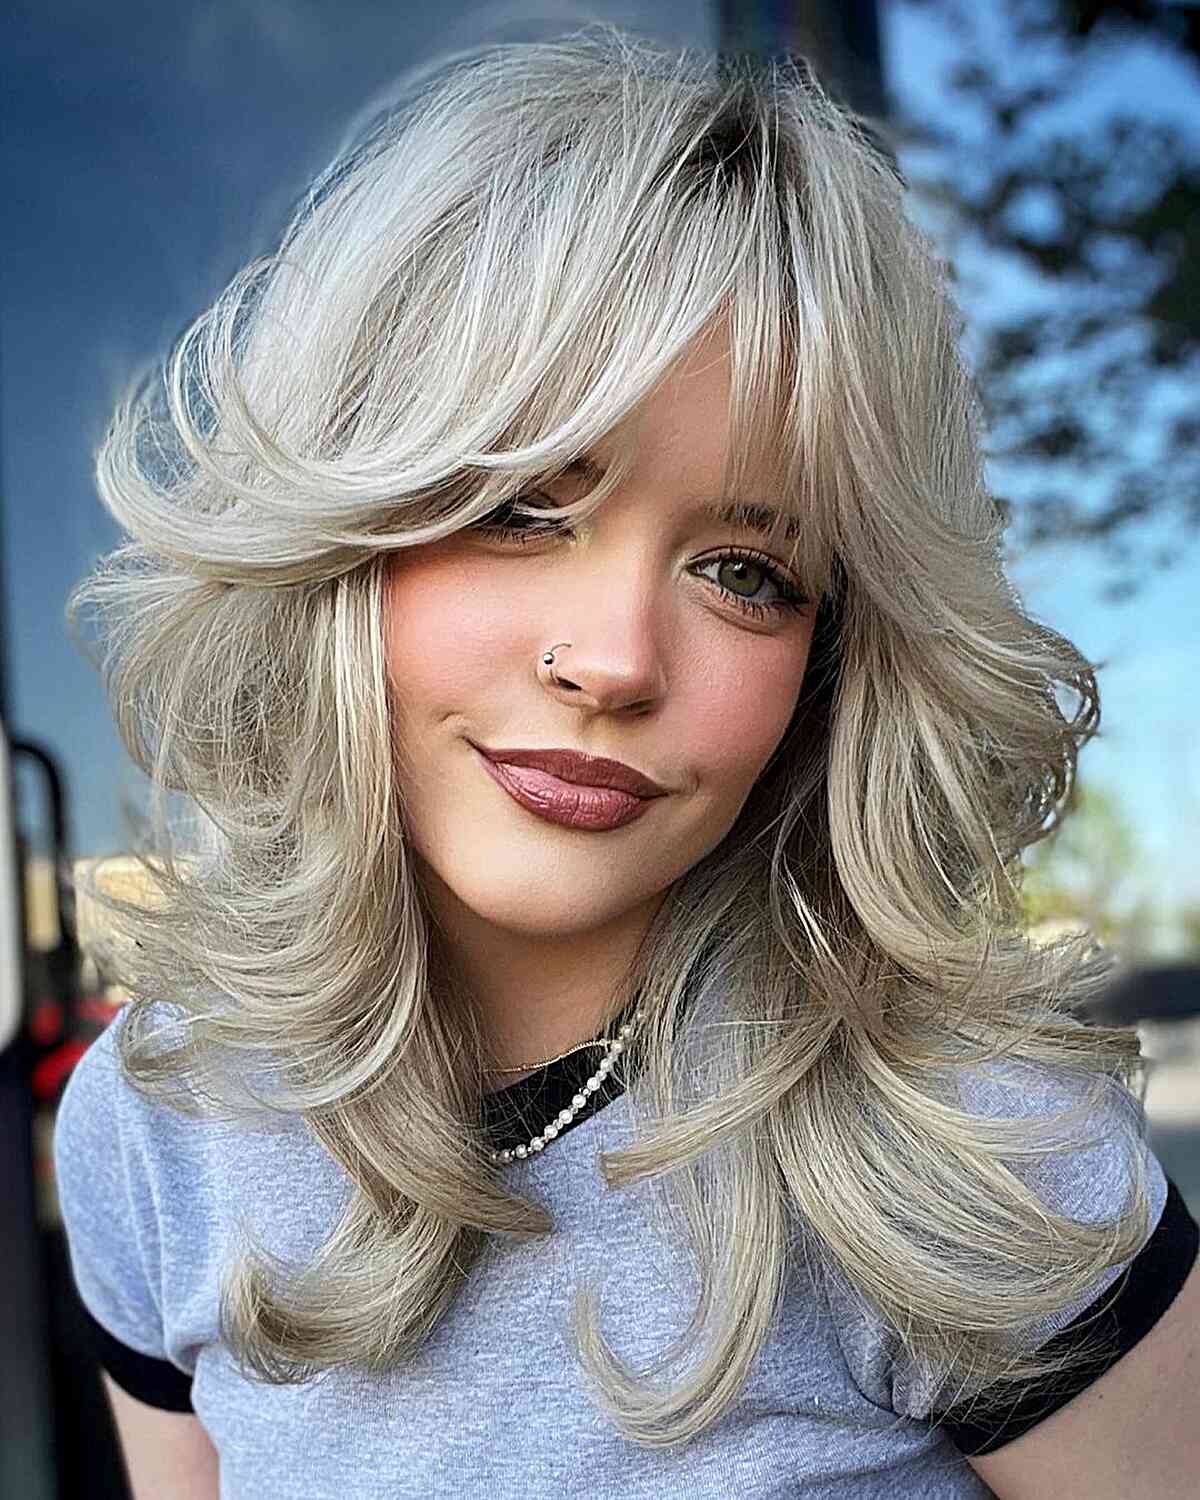 Medium-Length Blonde Shag with Lots of Volume and Bangs for women in their 30s with flair